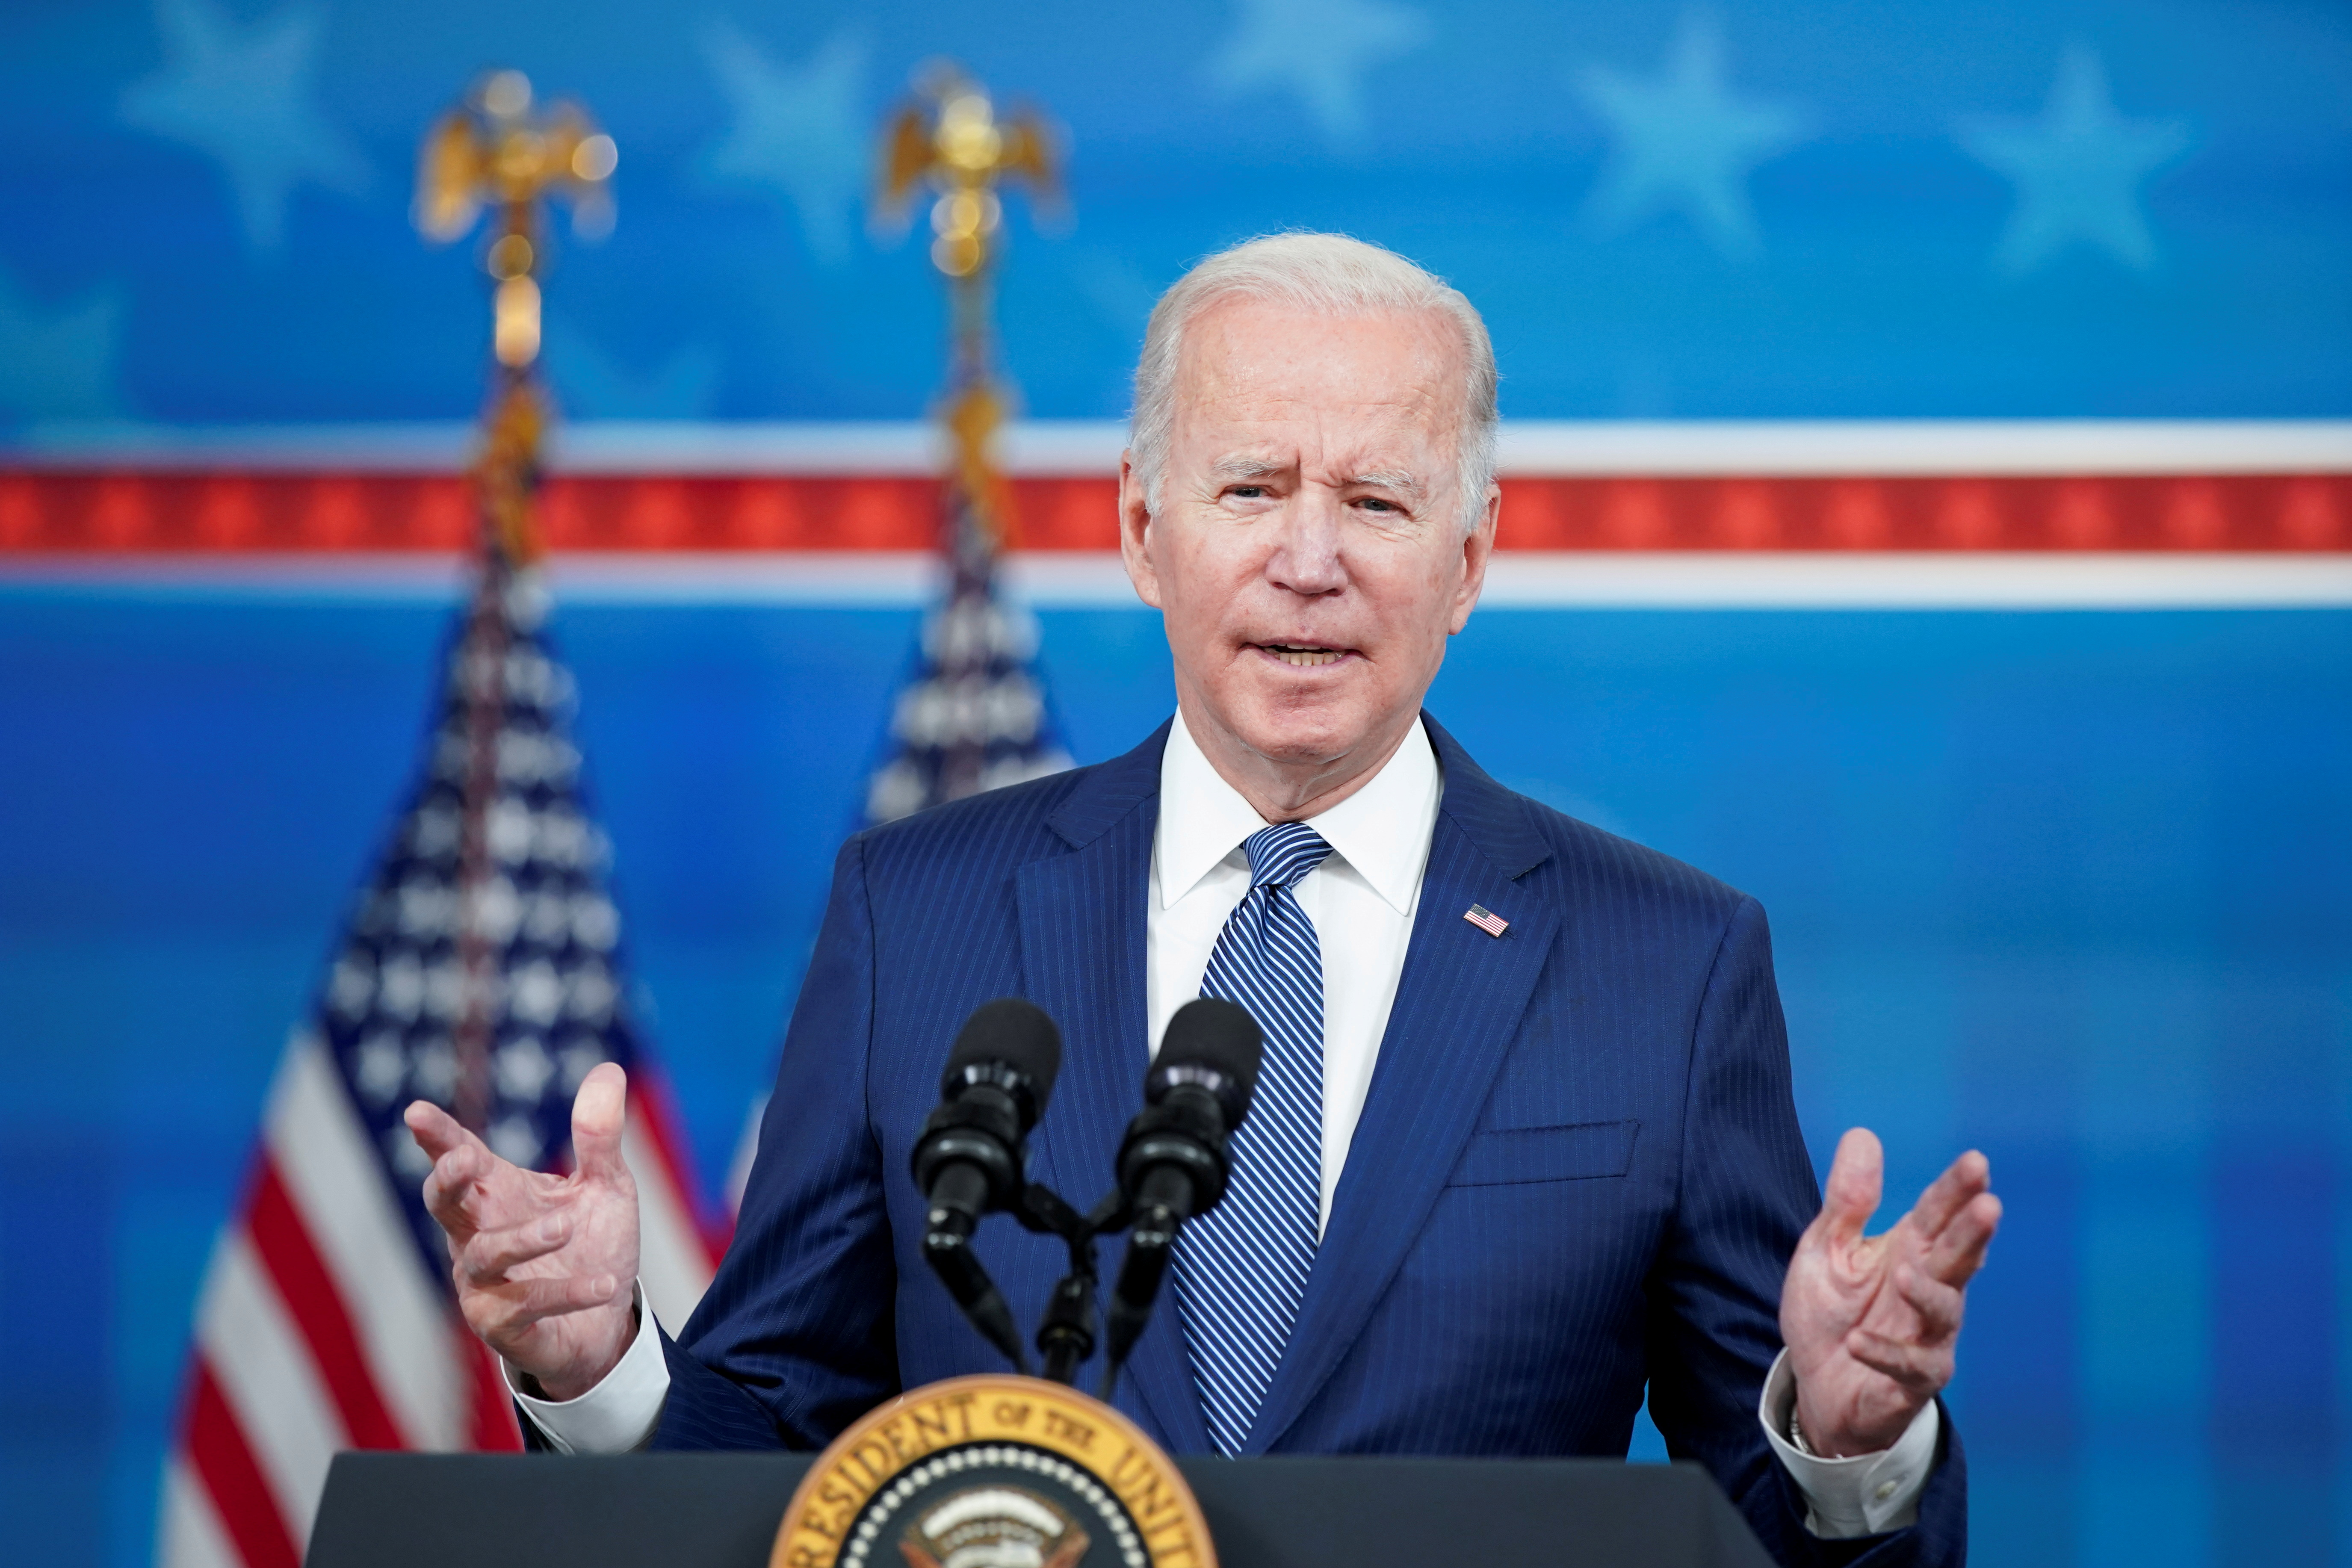 U.S. President Joe Biden speaks about his administration's efforts to ease supply chain issues during the holiday season, at the White House in Washington, U.S., December 1, 2021. REUTERS/Kevin Lamarque/File Photo